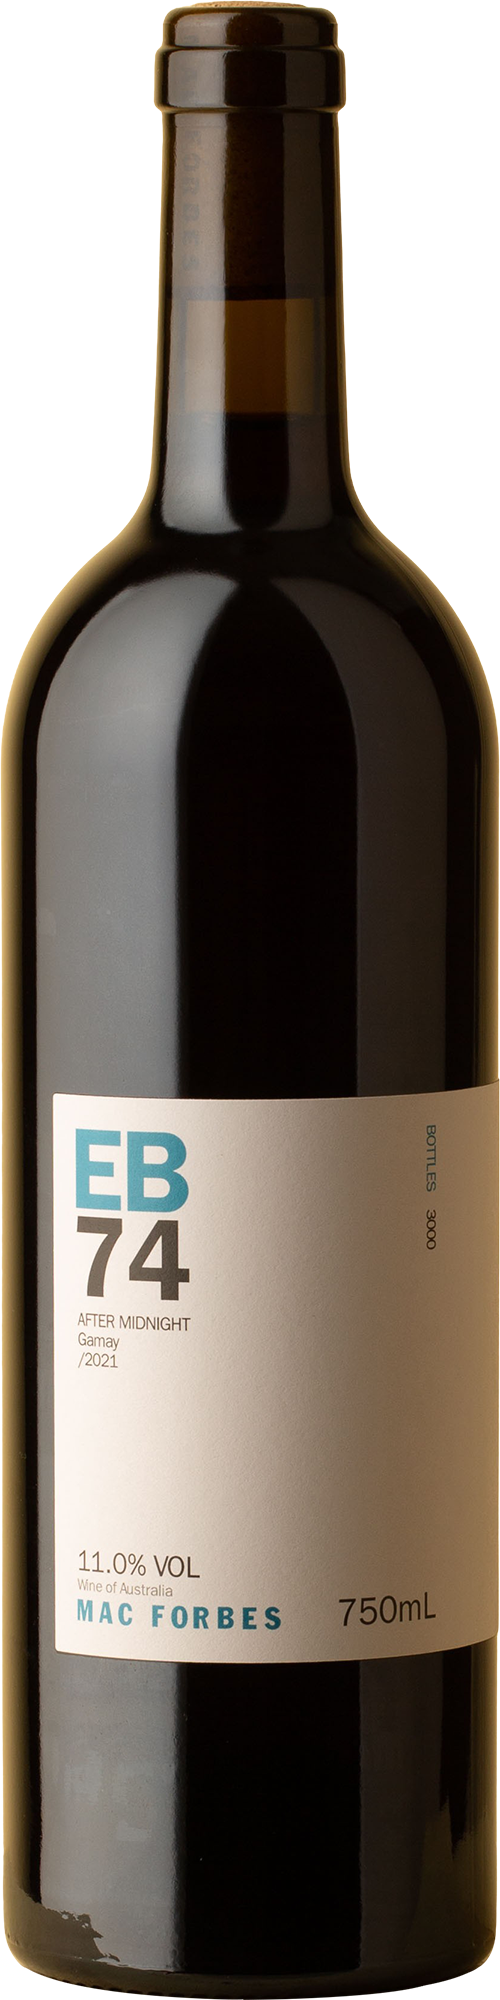 Mac Forbes - EB74 After Midnight Gamay 2021 Red Wine